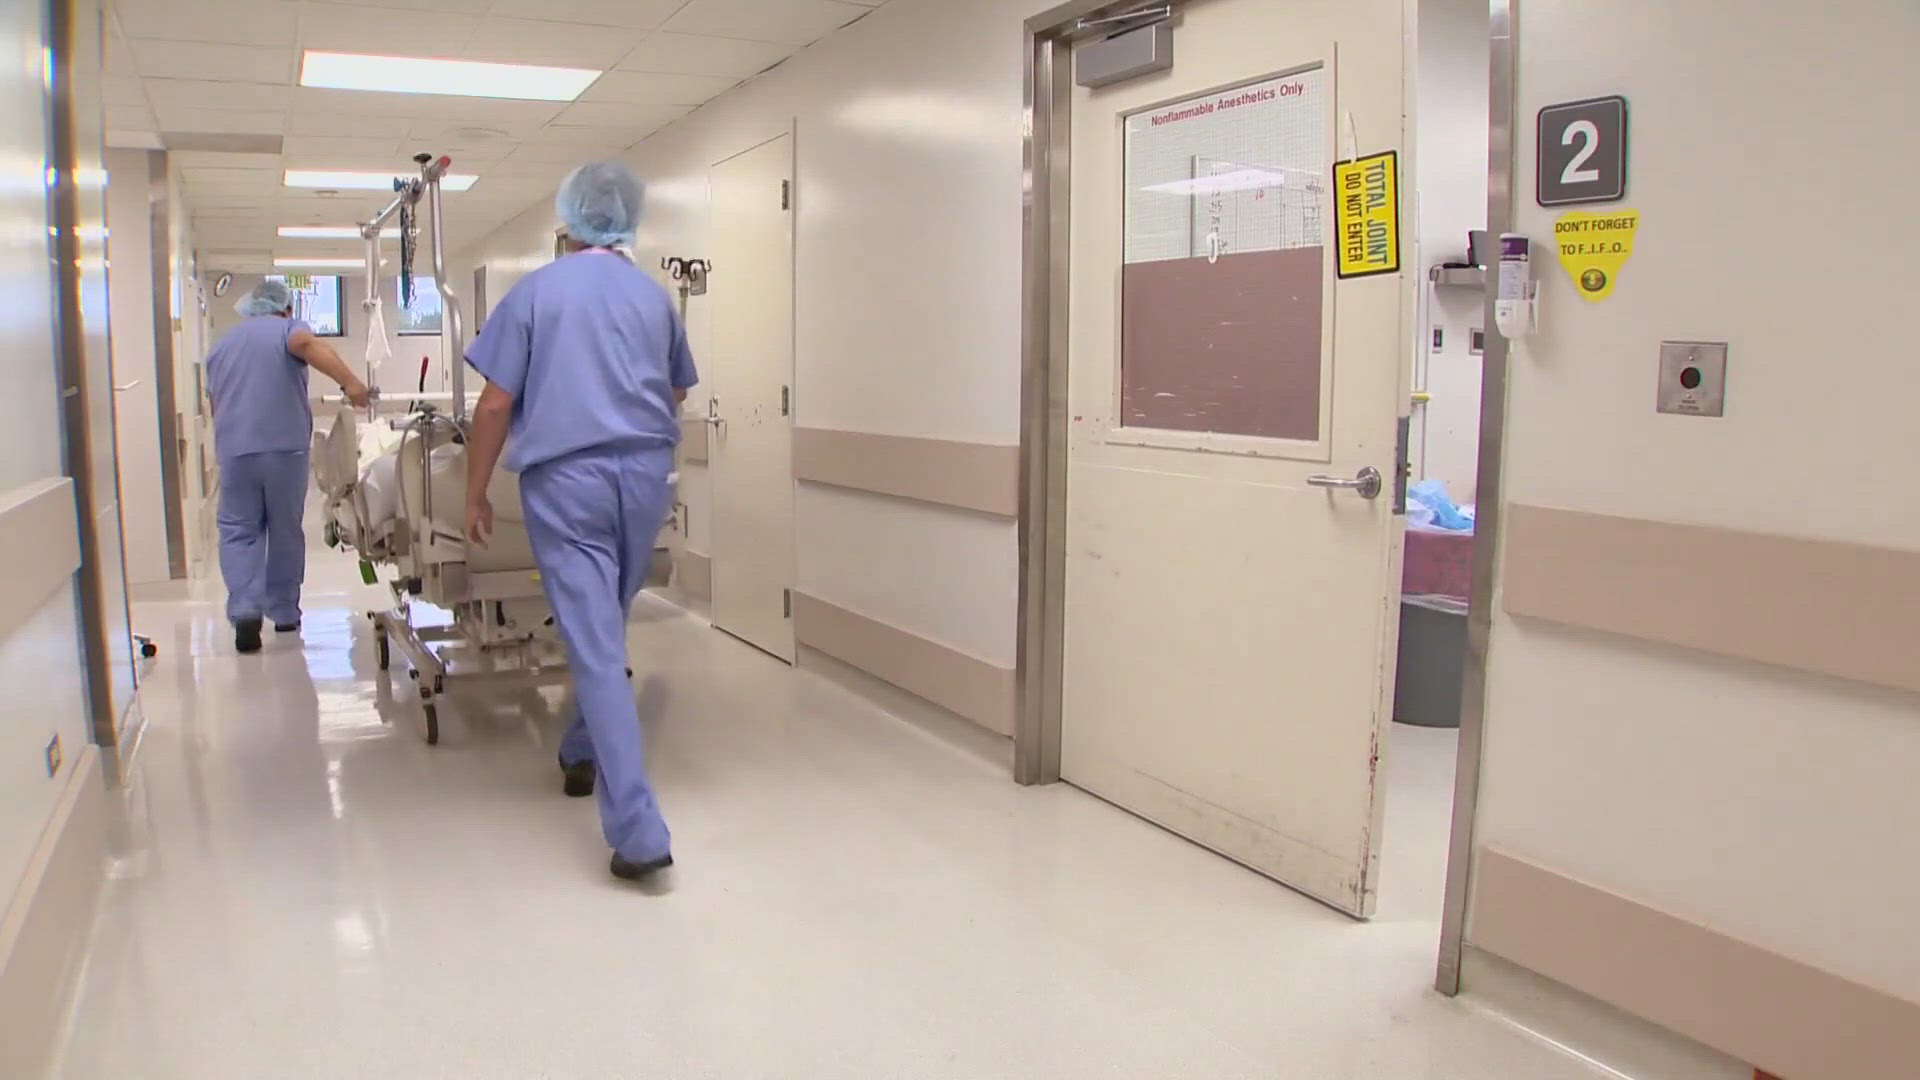 Rural hospitals in Colorado state are struggling to get enough funding to staff doctors and nurses. State lawmakers are trying to help with a new bill.